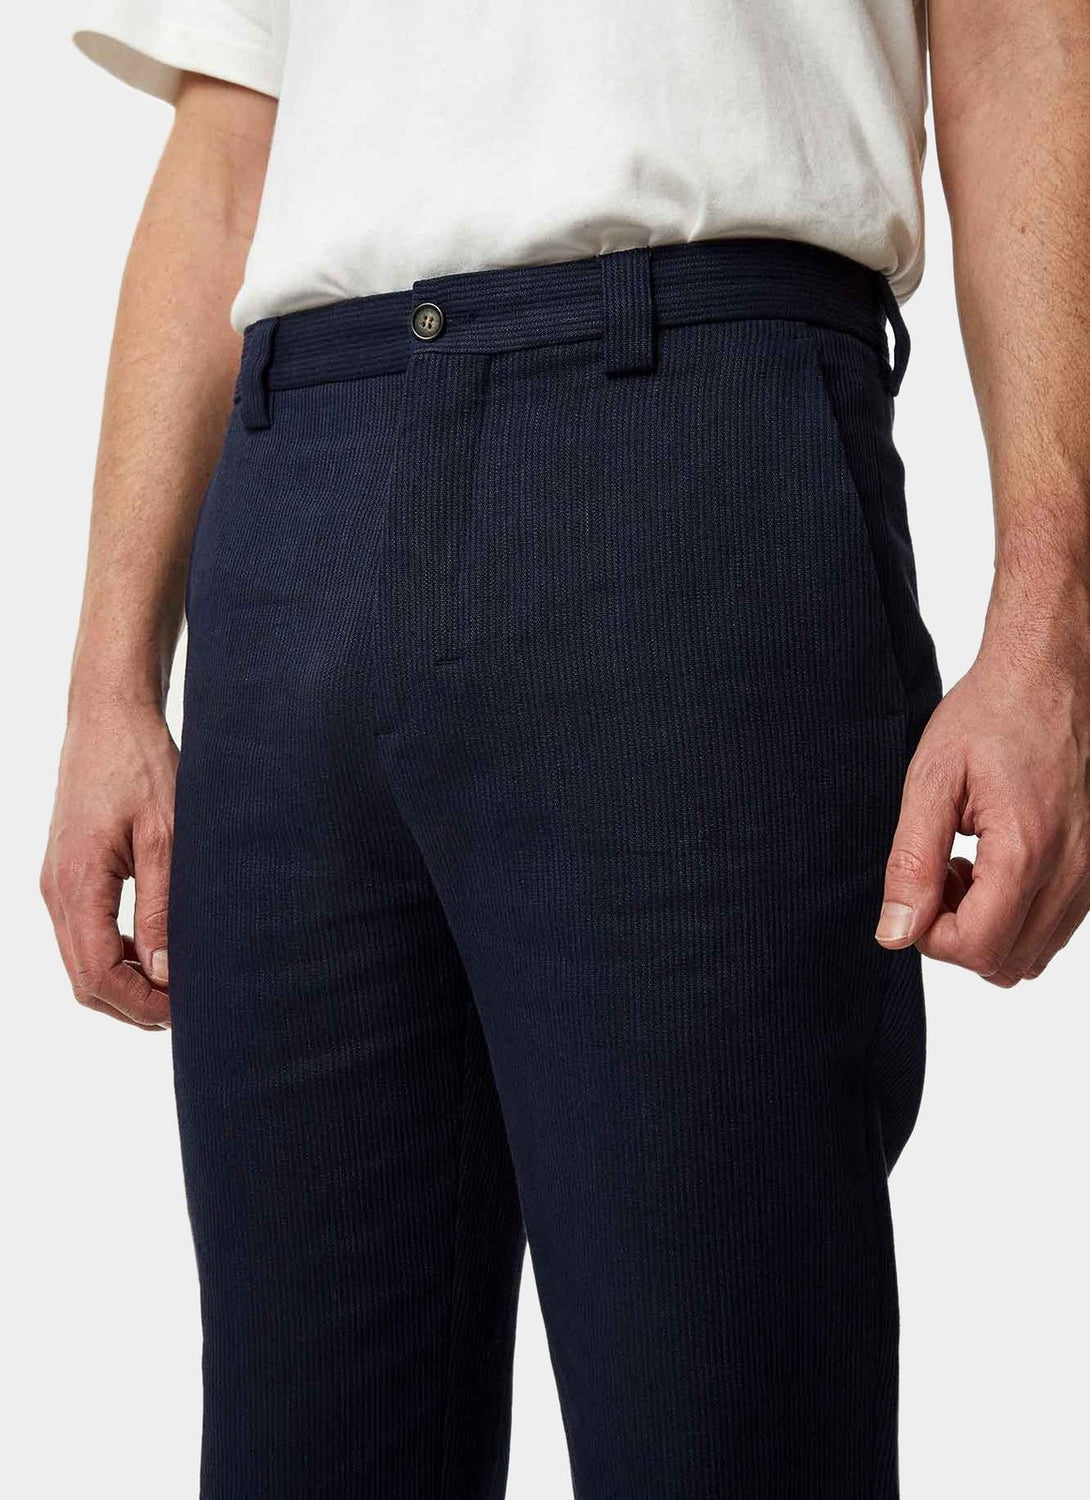 Men Trousers | Ink Blue Washed Linen Trousers by Spanish designer Adolfo Dominguez